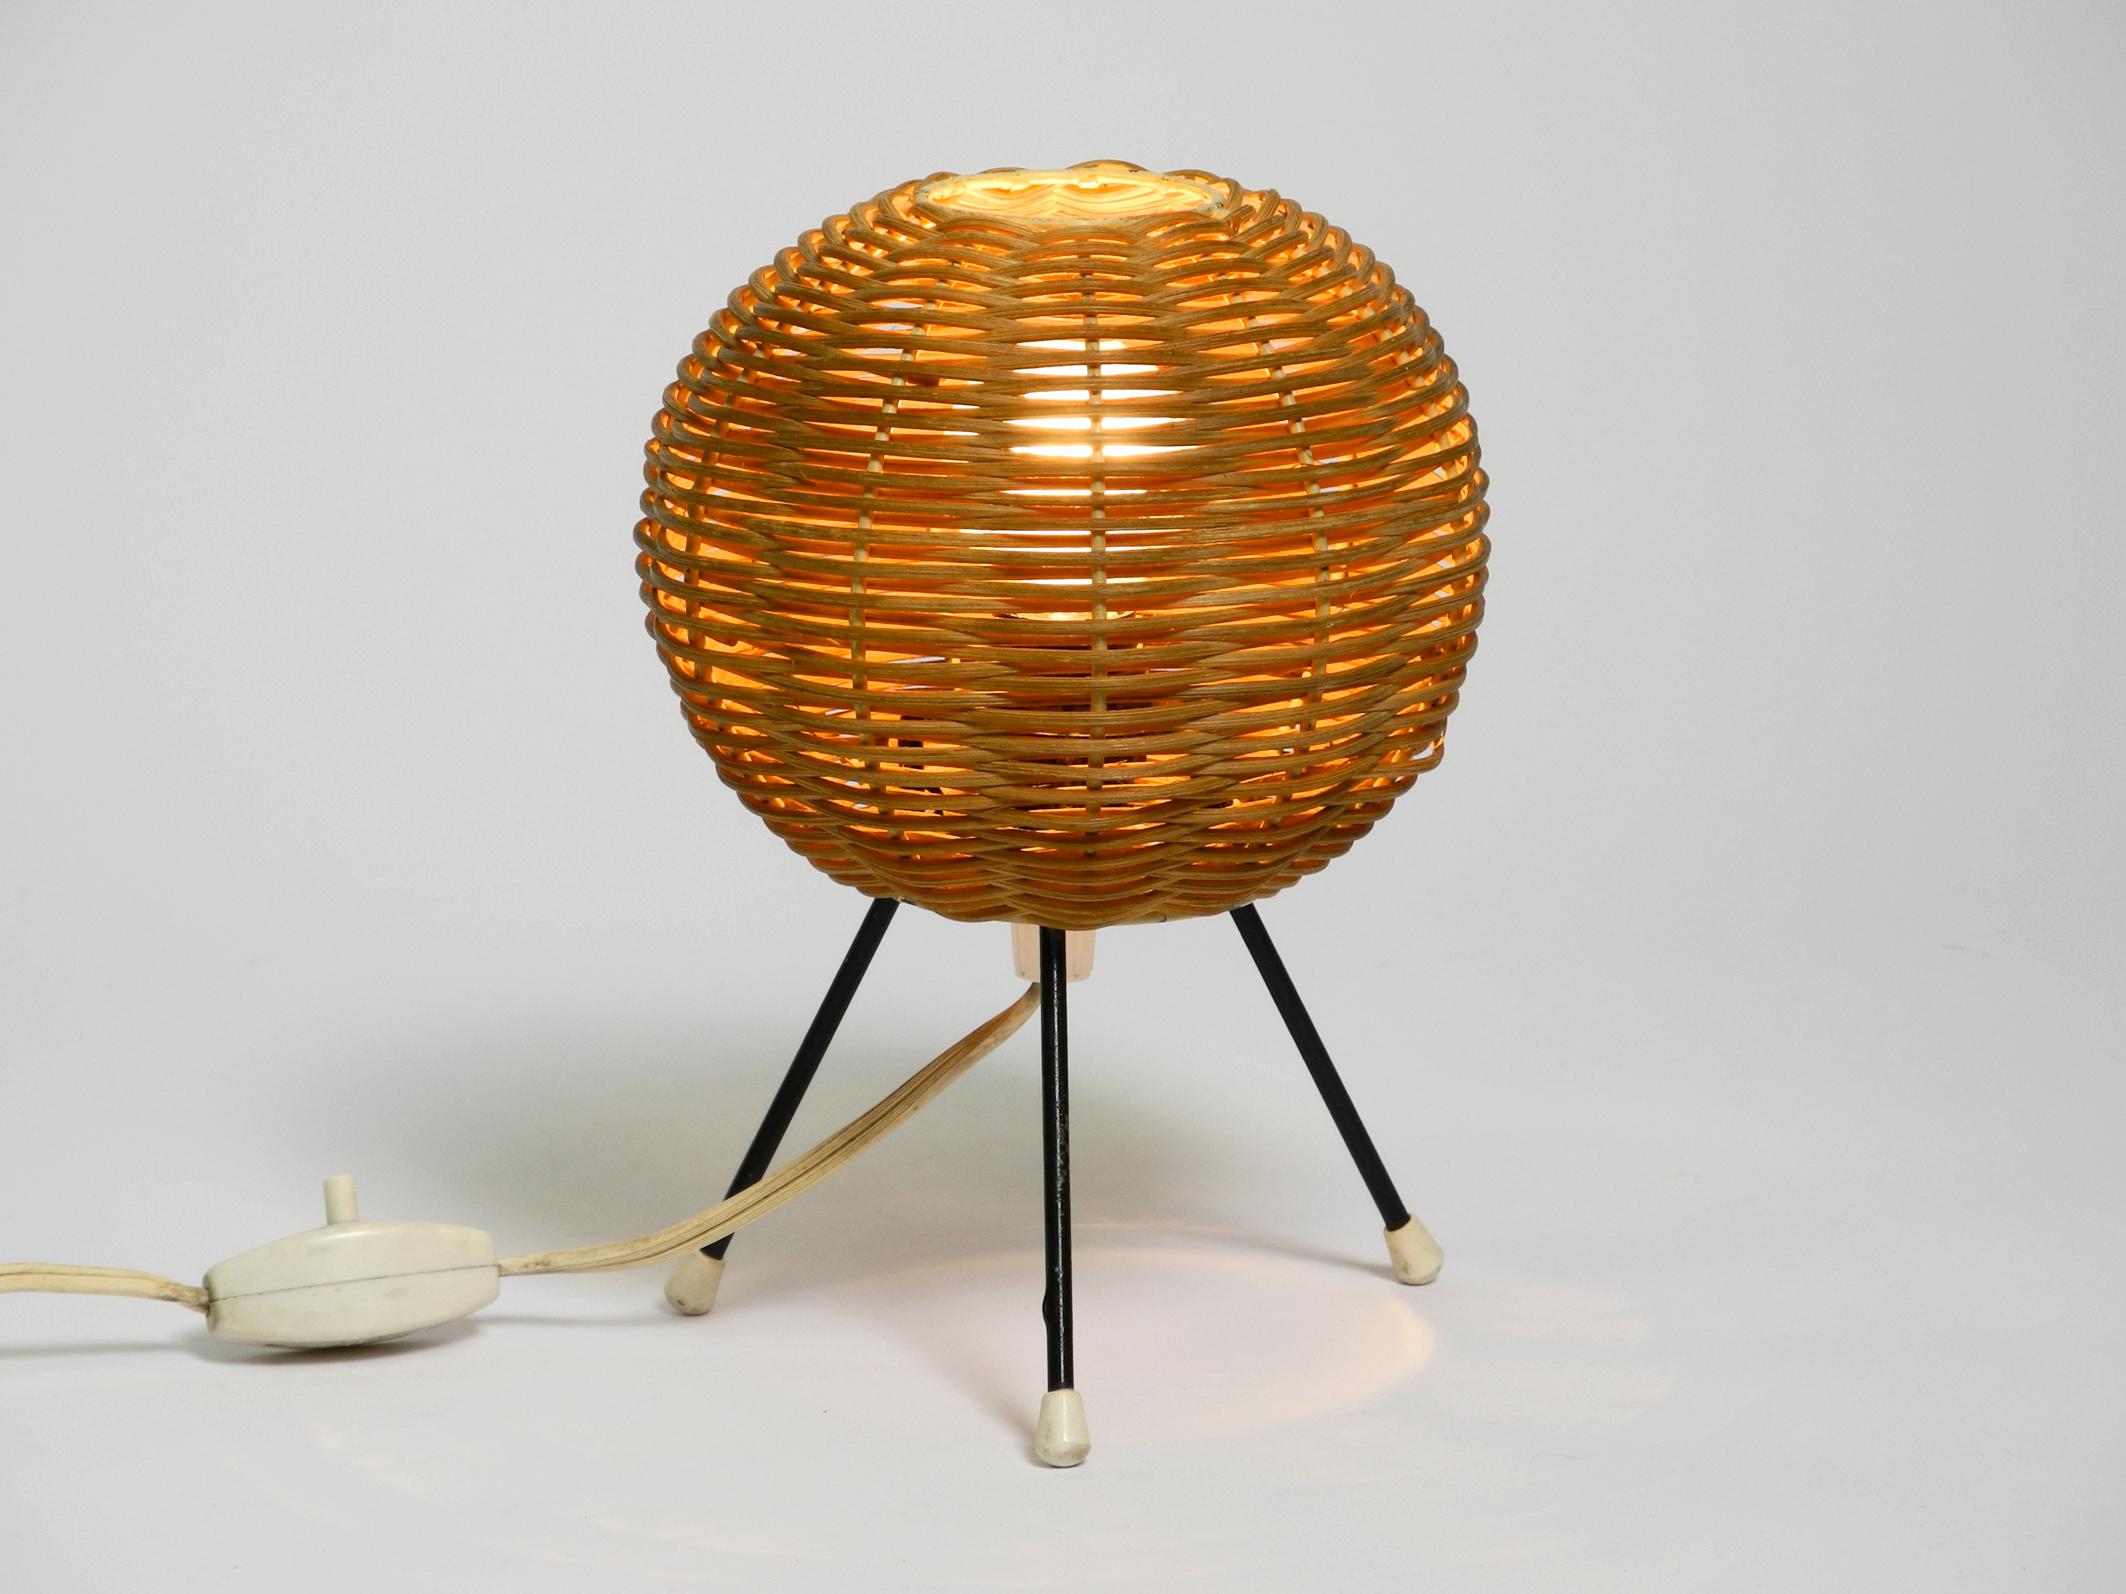 Beautiful original 1950s metal tripod table lamp with wicker lampshade.
Great 50s design in very good vintage condition.
Ball lampshade made of real wicker with a white metal frame.
Black painted metal legs with all three plastic ends.
Great, very